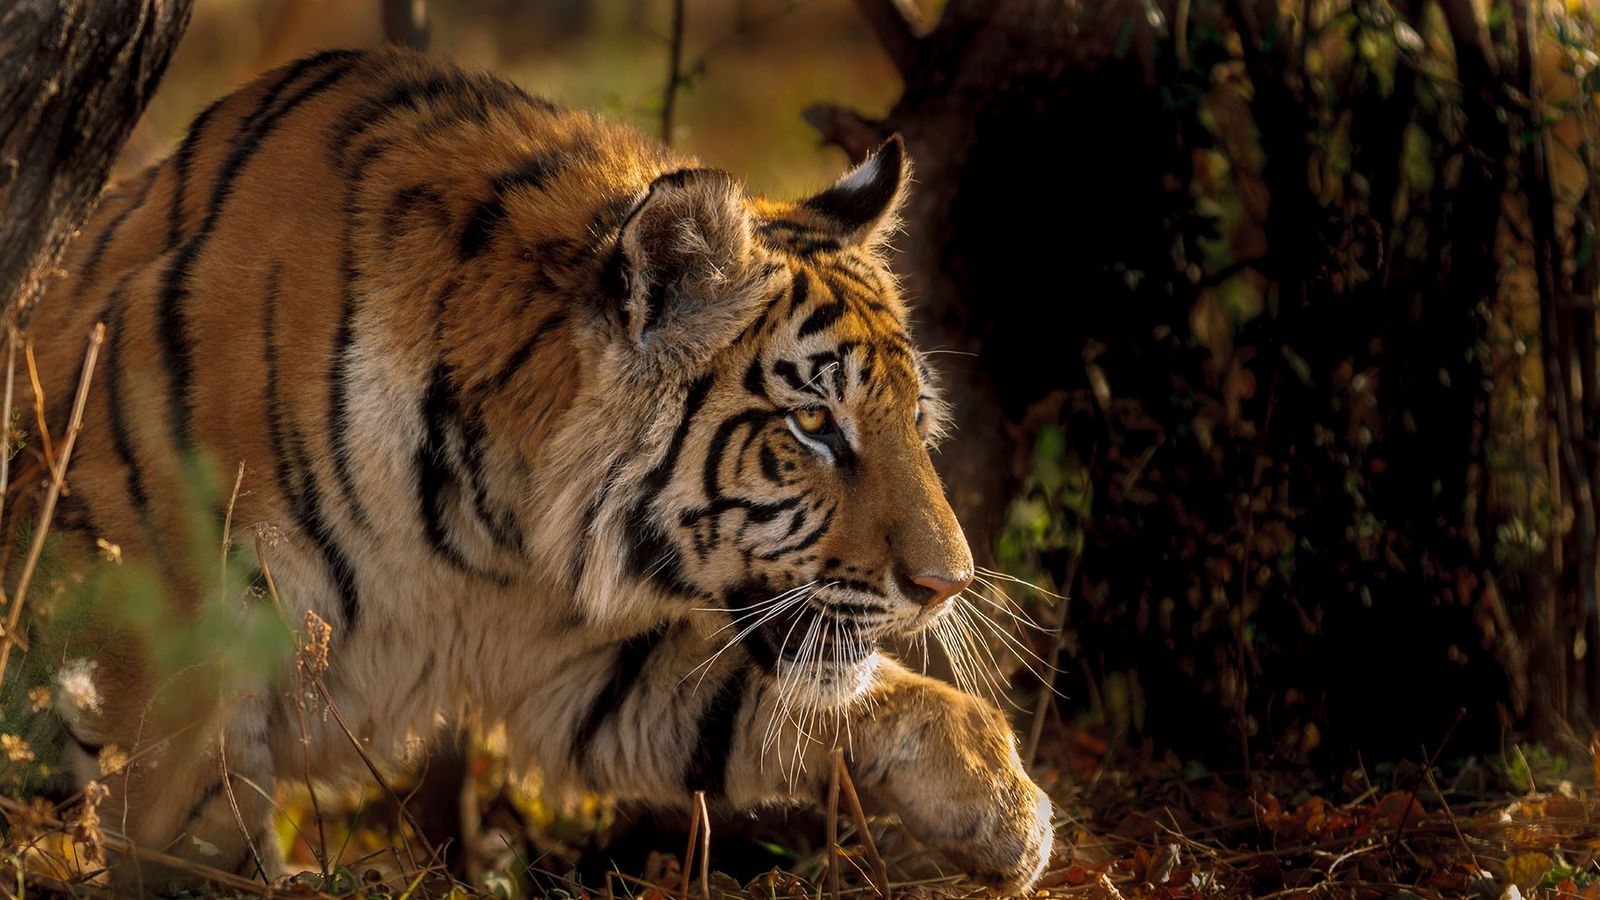 Tales of the tiger: searching for big cats in India's wildest state